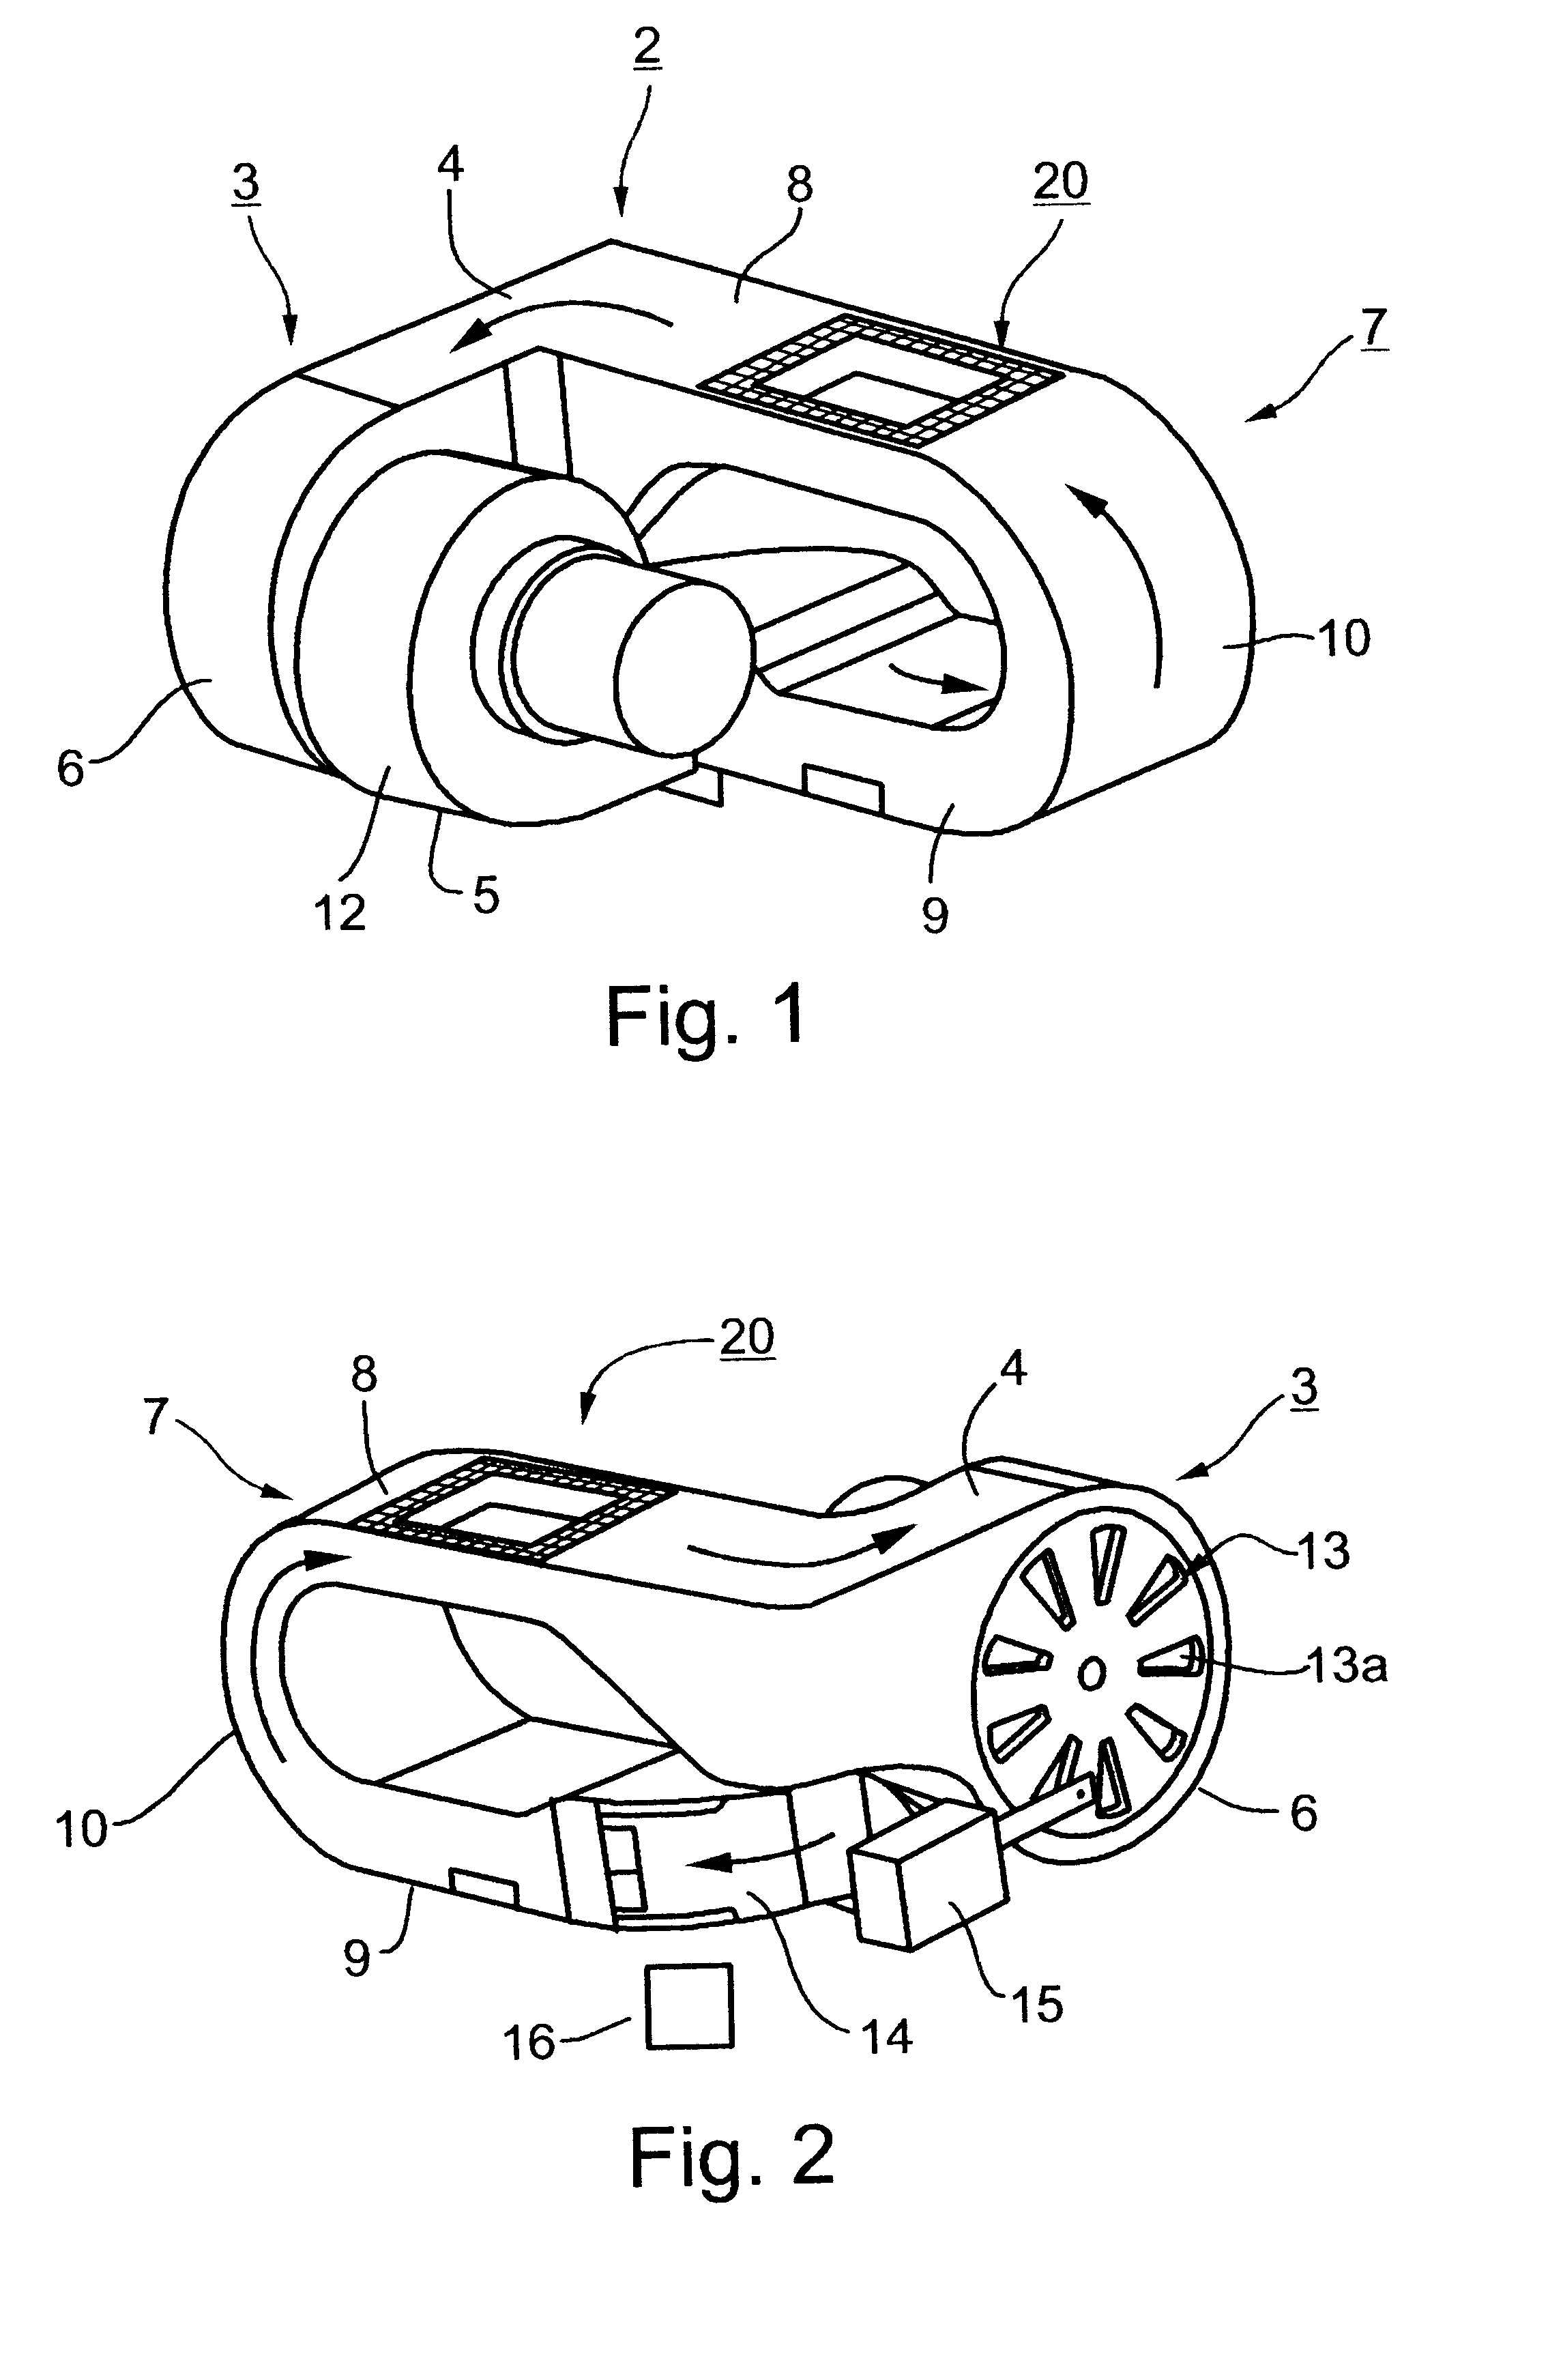 Method and apparatus for effecting rapid thermal cycling of samples in microtiter plate size